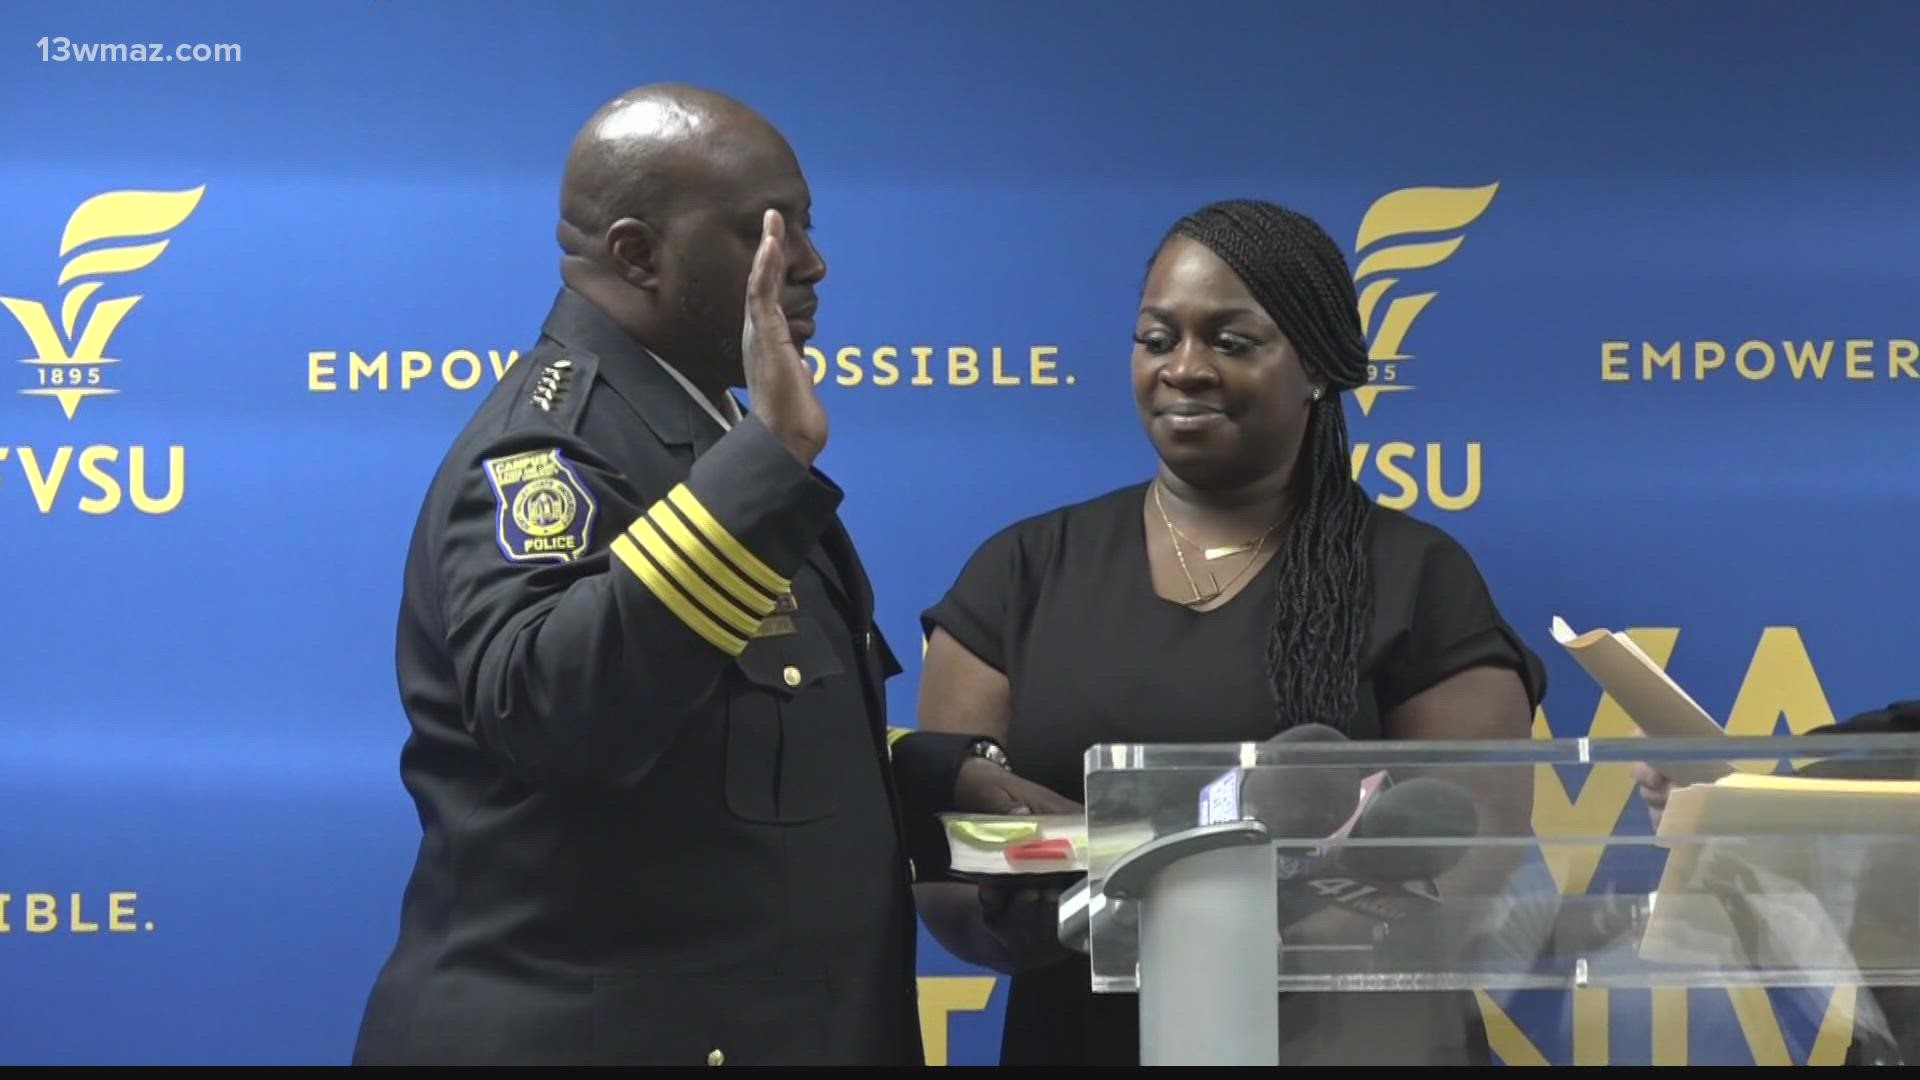 Campus safety and commitment to the community were some of the values Antonio Fletcher talked about during his swearing in.